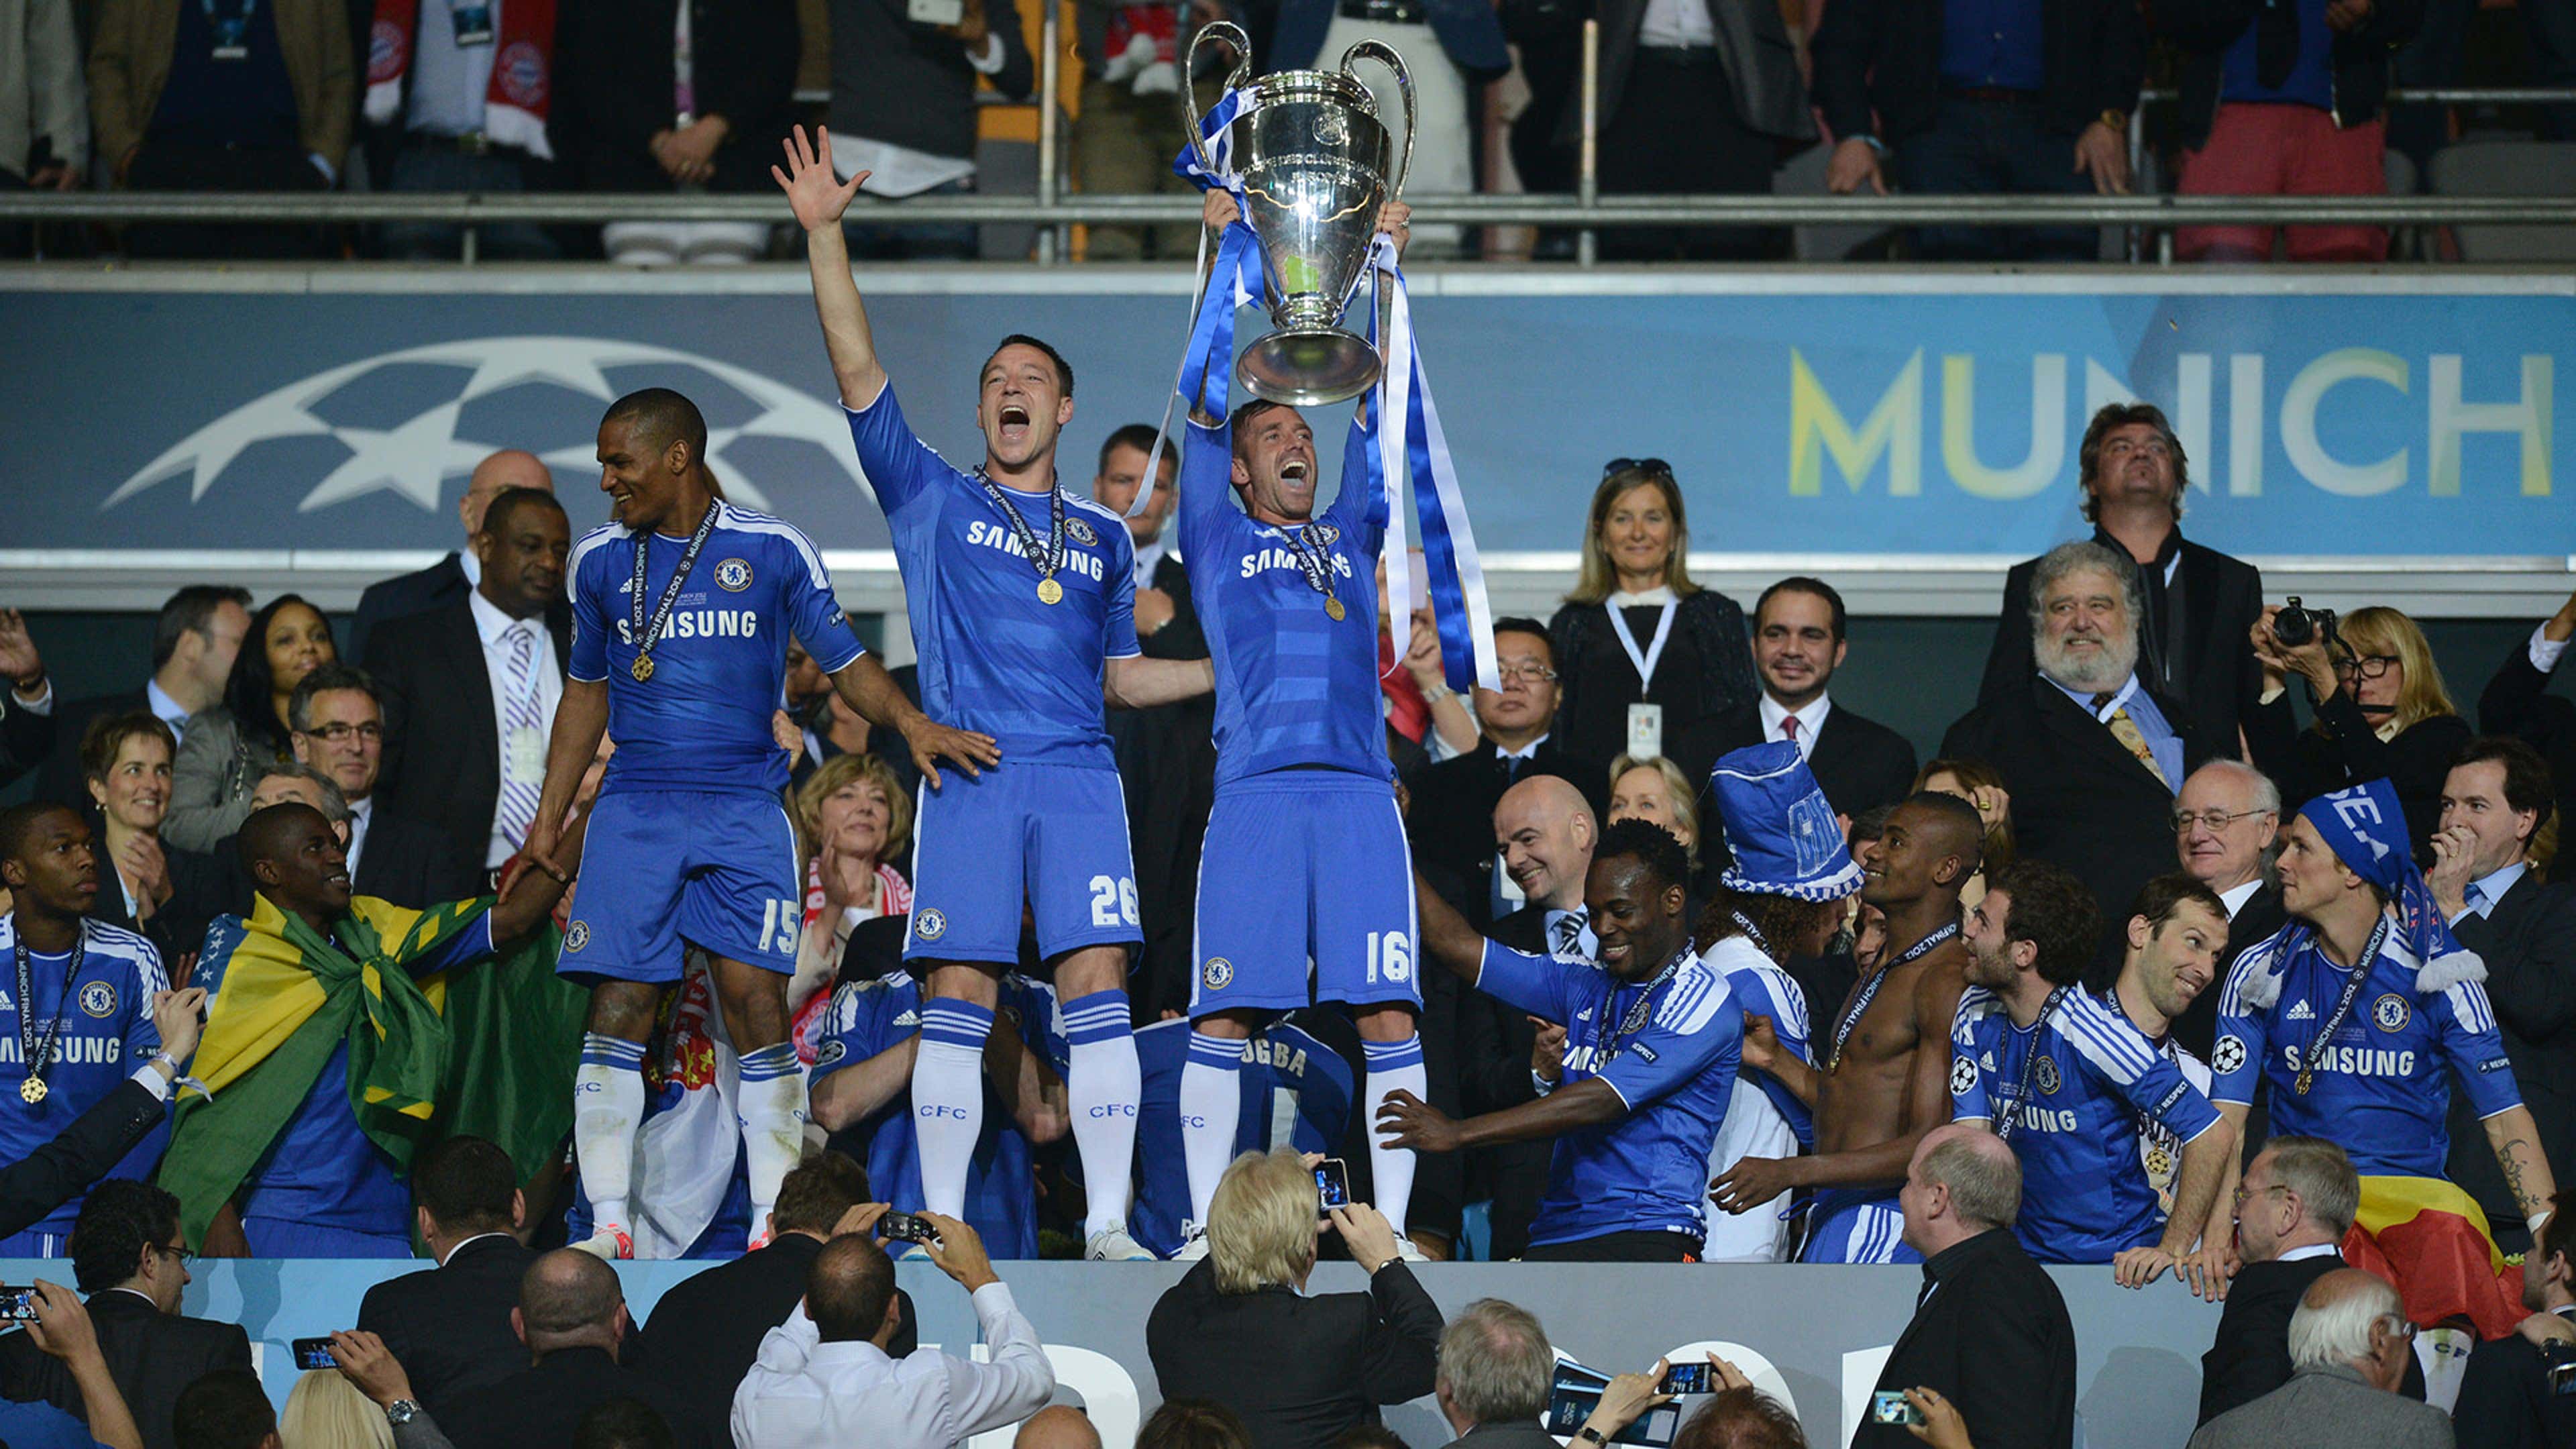 Chelsea's first Champions League winning team - Who played in the final and  where are they now?